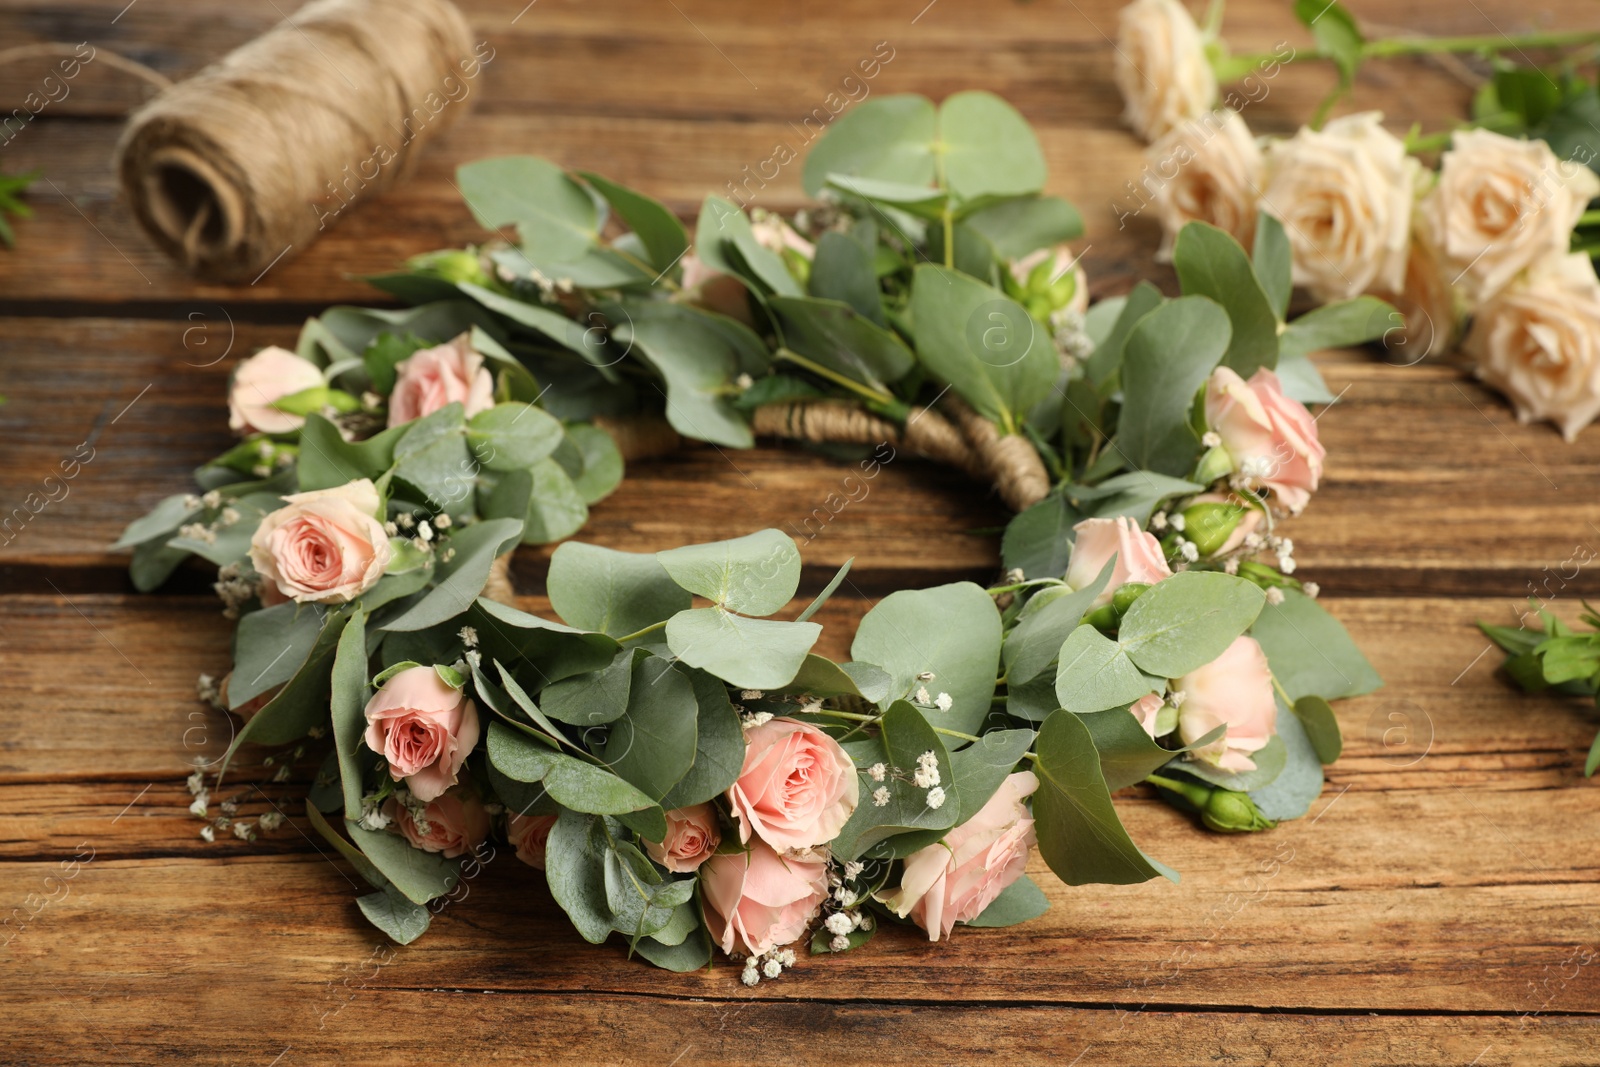 Photo of Composition with wreath made of beautiful flowers on wooden table